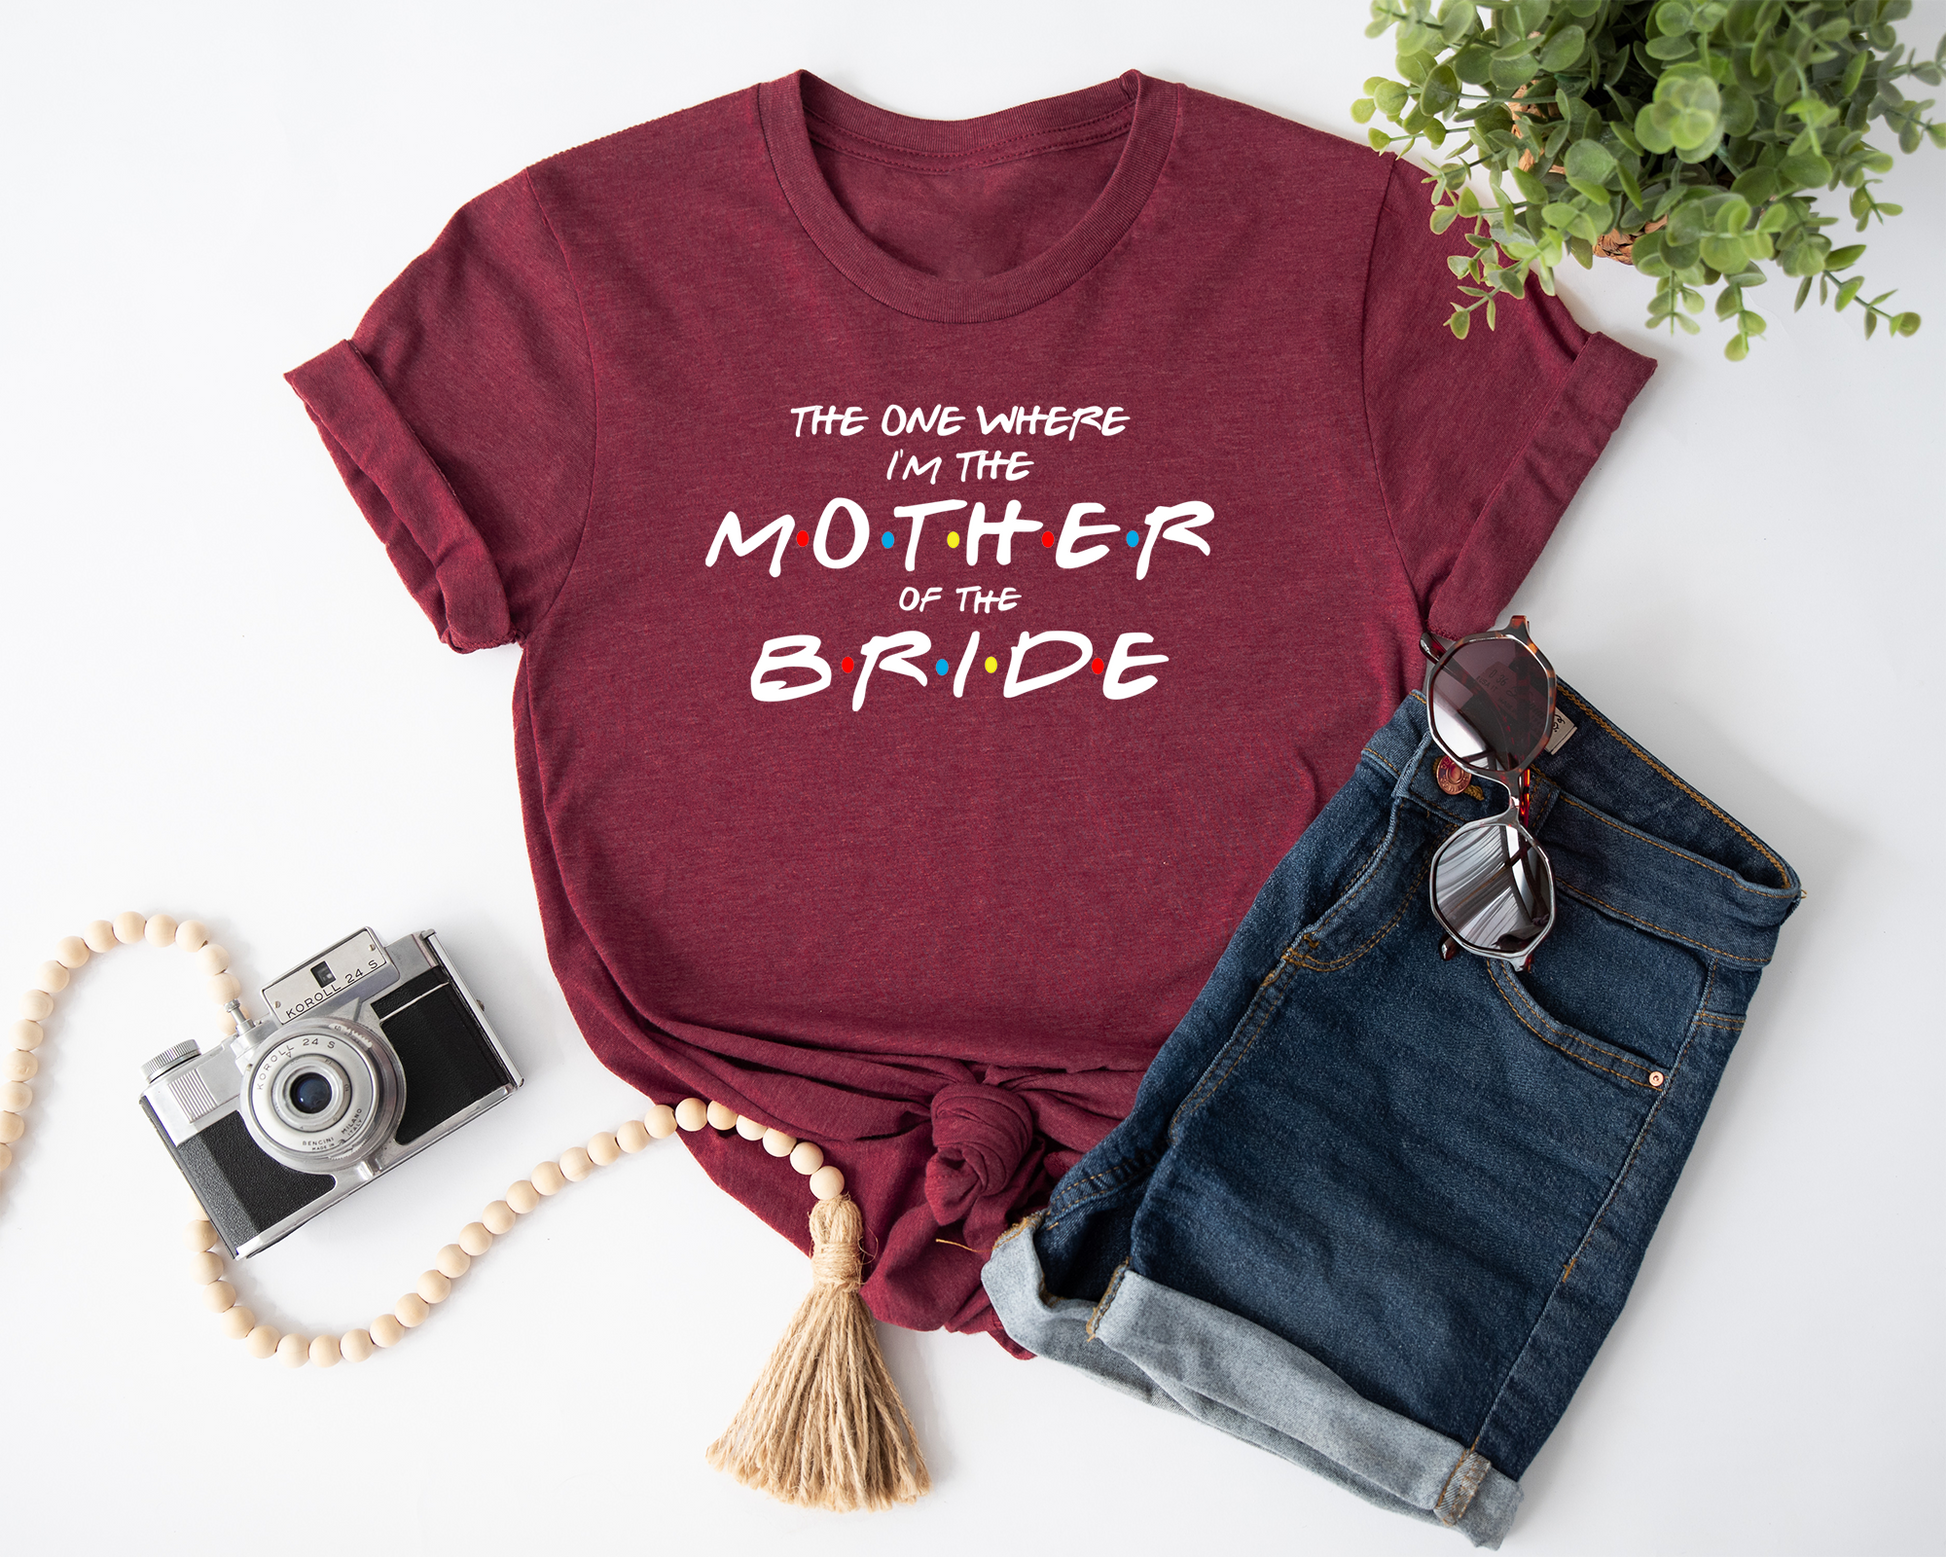 2668805b-fdce-4a02-87dd-741293ae6d35/mother_of_the_bride_white-MaroonL-F.png